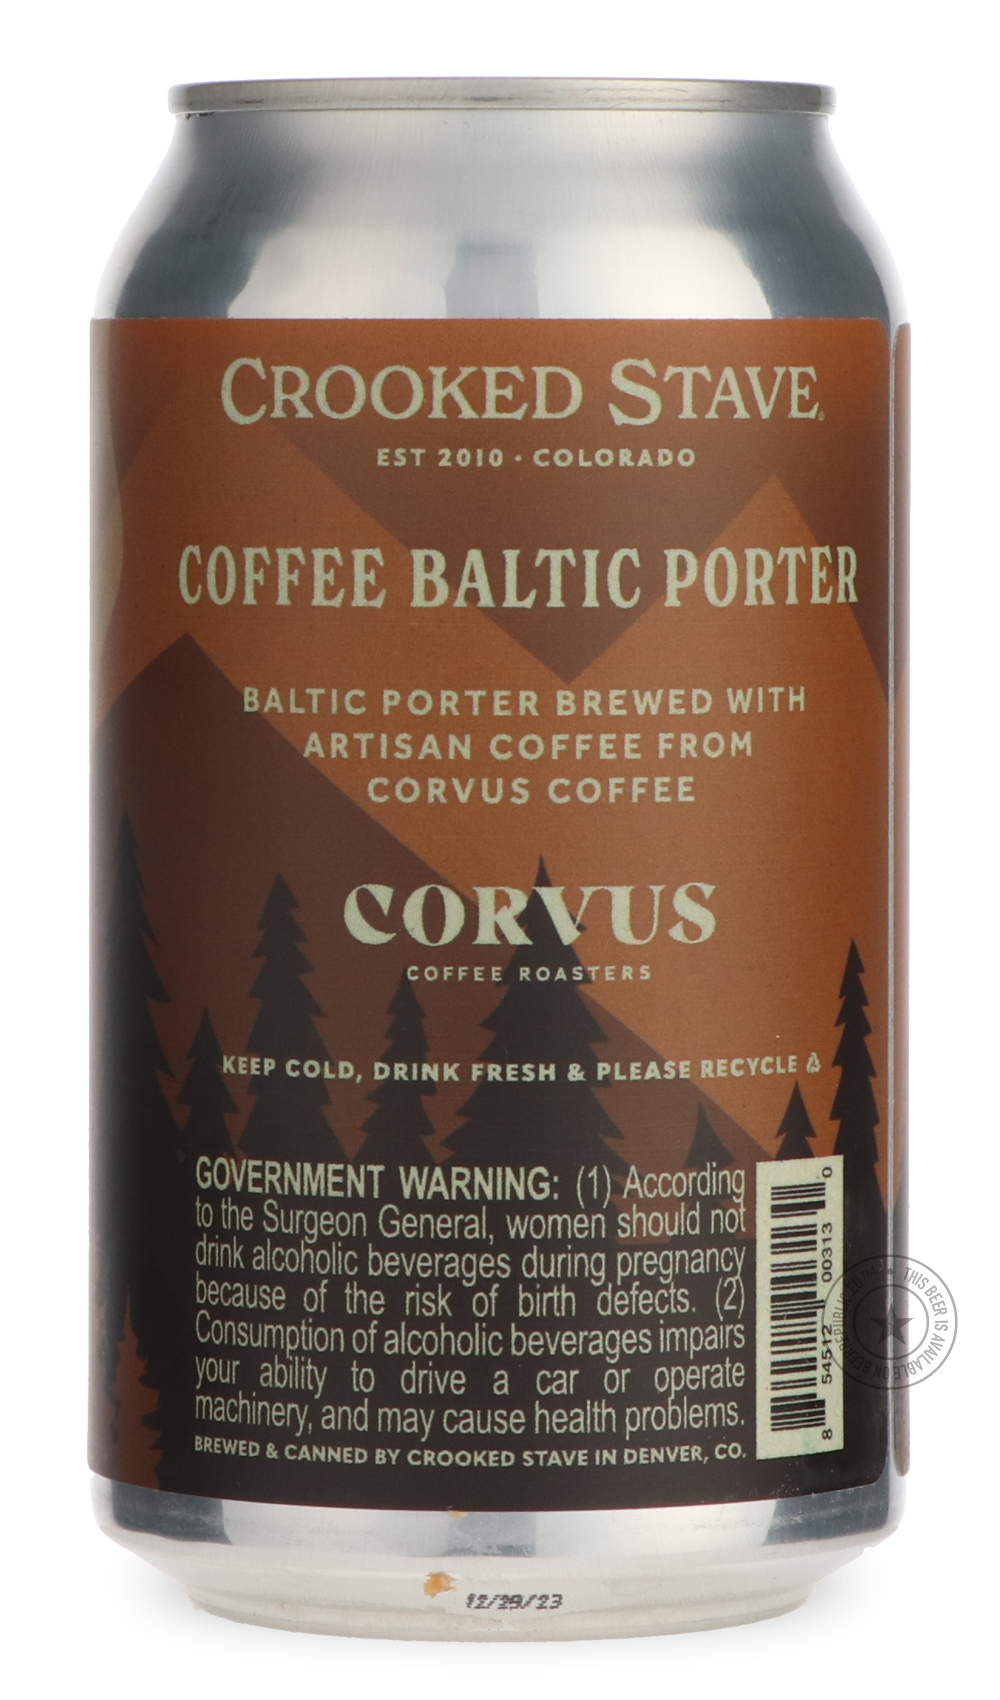 -Crooked Stave- Coffee Baltic Porter-Stout & Porter- Only @ Beer Republic - The best online beer store for American & Canadian craft beer - Buy beer online from the USA and Canada - Bier online kopen - Amerikaans bier kopen - Craft beer store - Craft beer kopen - Amerikanisch bier kaufen - Bier online kaufen - Acheter biere online - IPA - Stout - Porter - New England IPA - Hazy IPA - Imperial Stout - Barrel Aged - Barrel Aged Imperial Stout - Brown - Dark beer - Blond - Blonde - Pilsner - Lager - Wheat - We